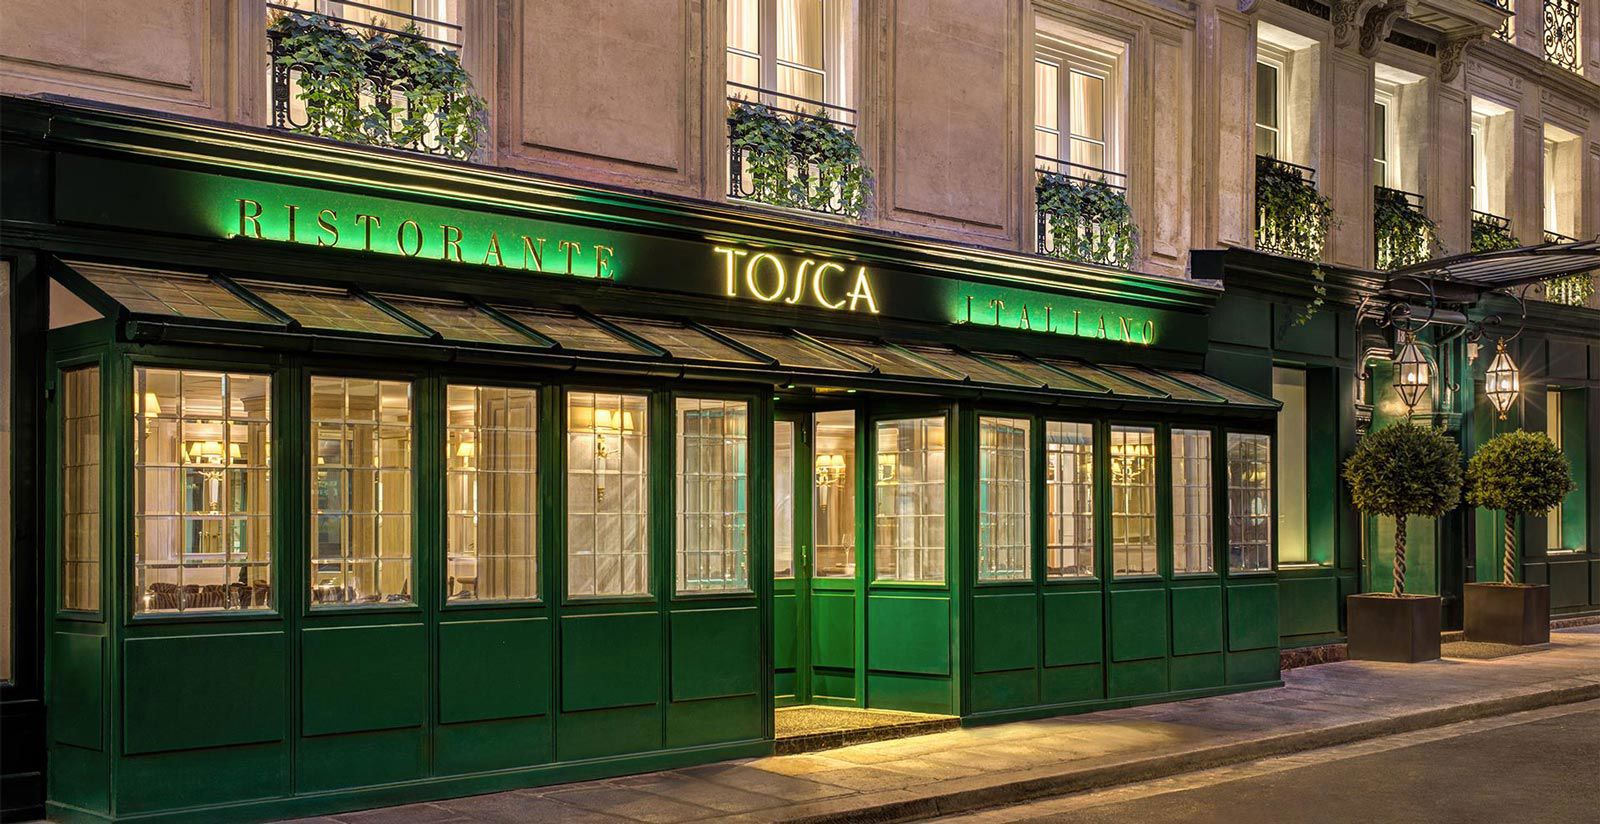 Gastronomic experience at the Tosca 9